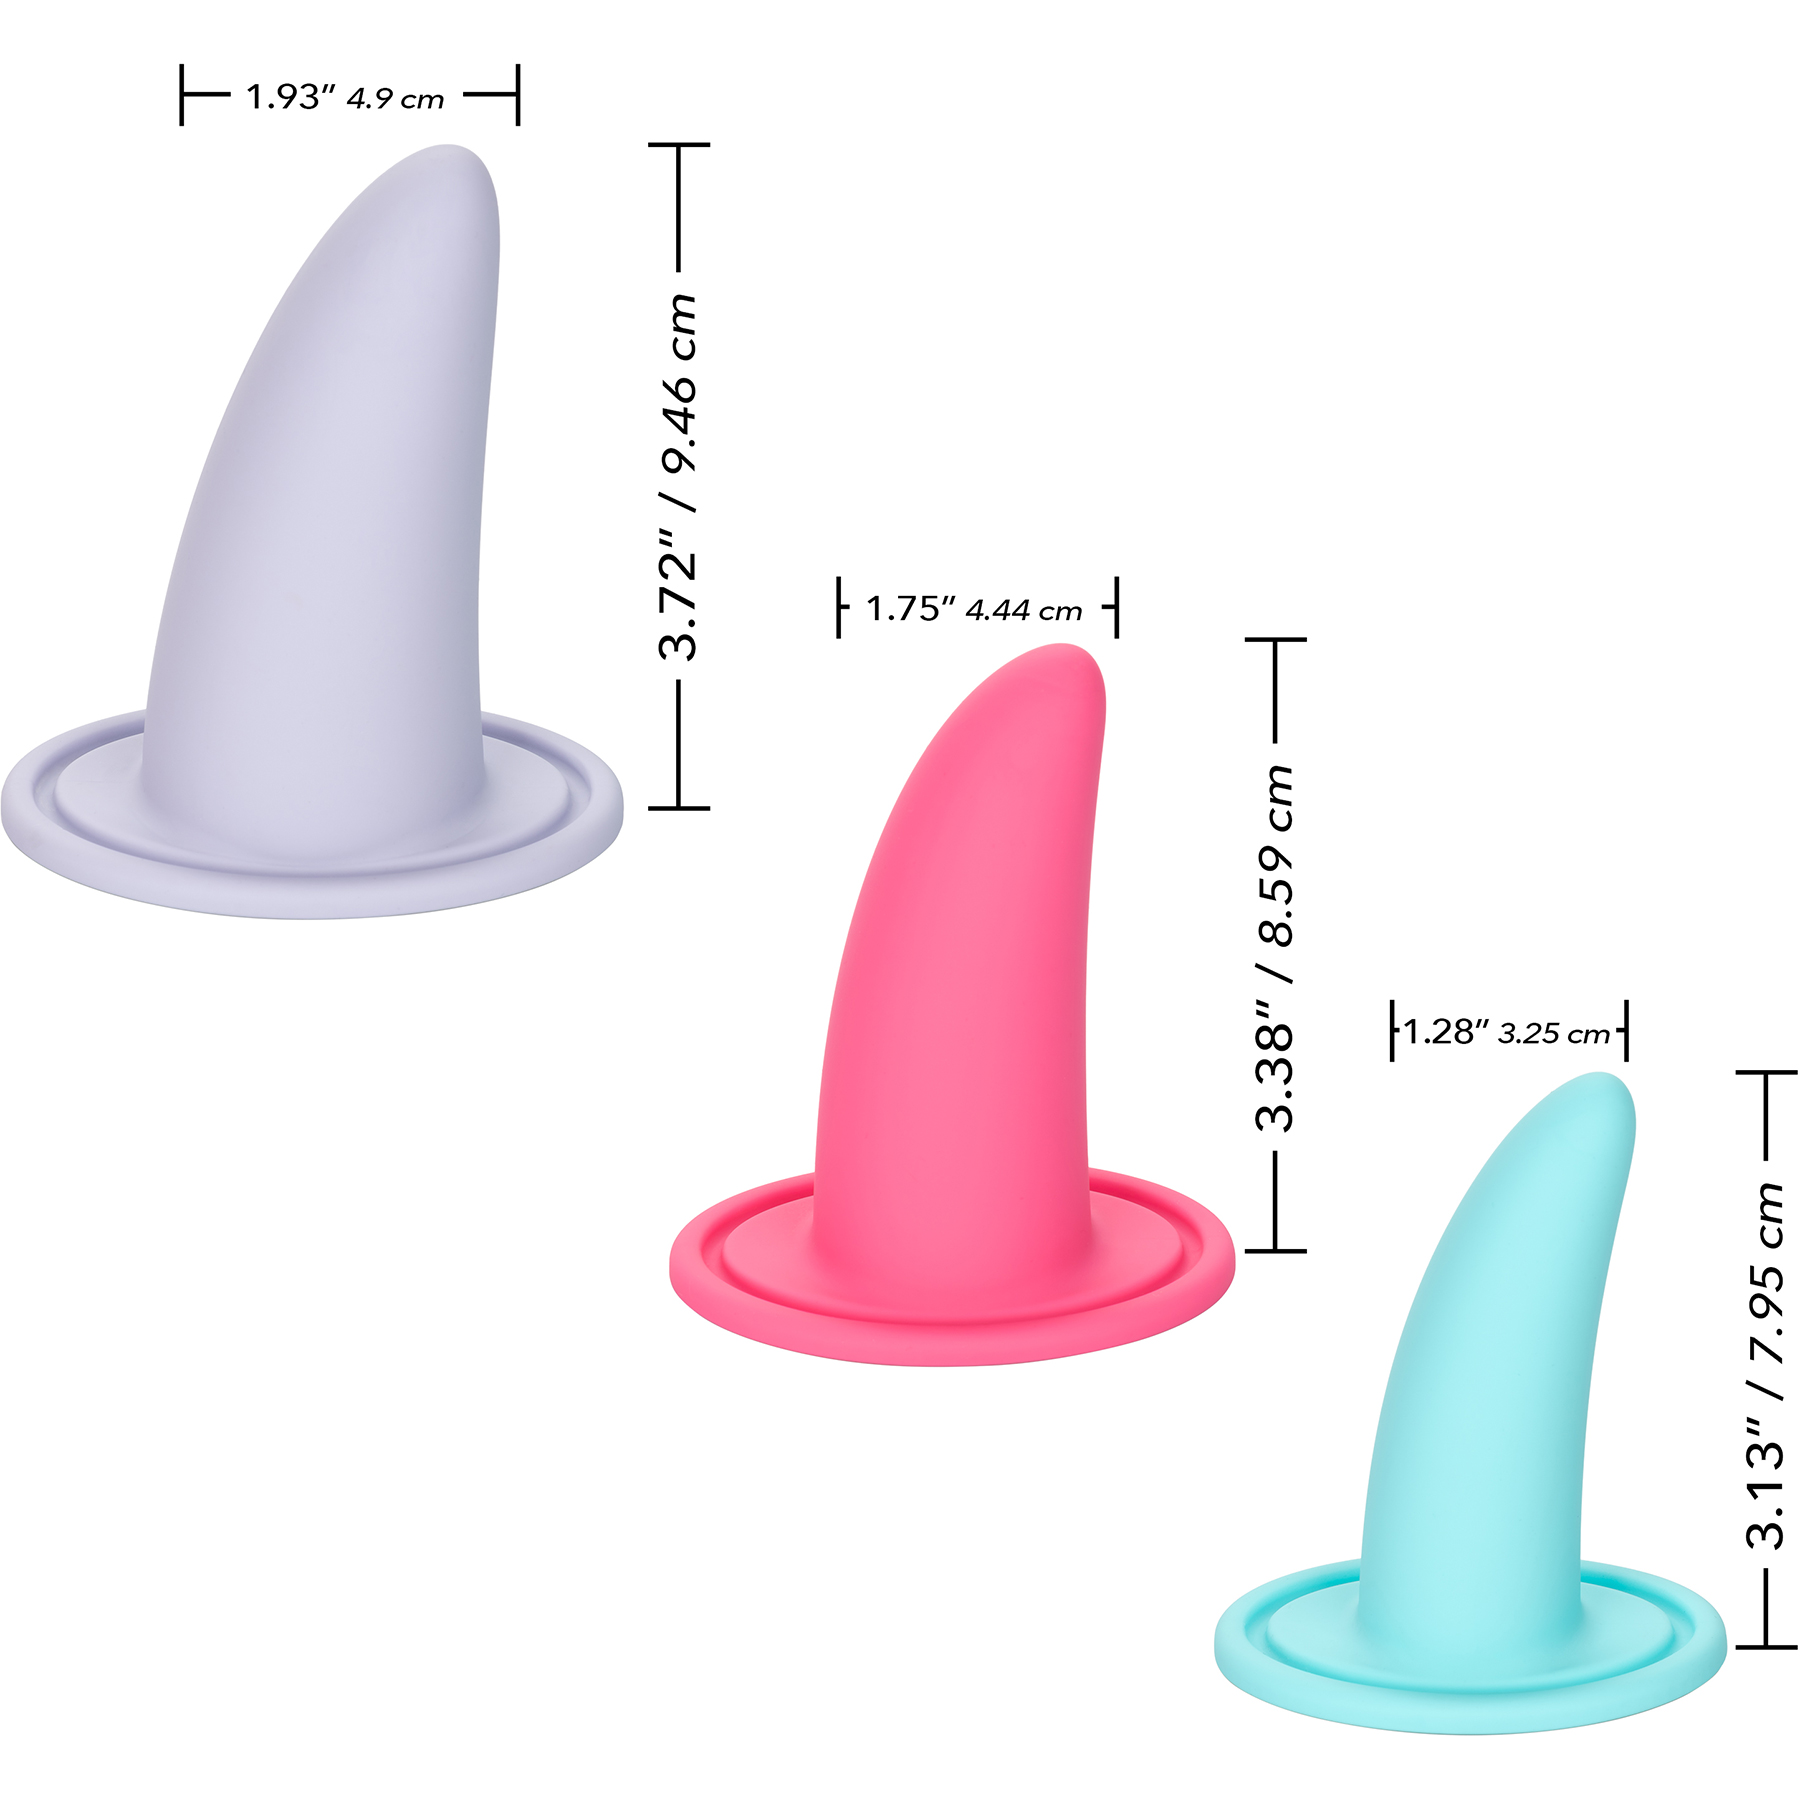 She-ology Advanced 3-Piece Wearable Vaginal Silicone Dilator Set - Measurements